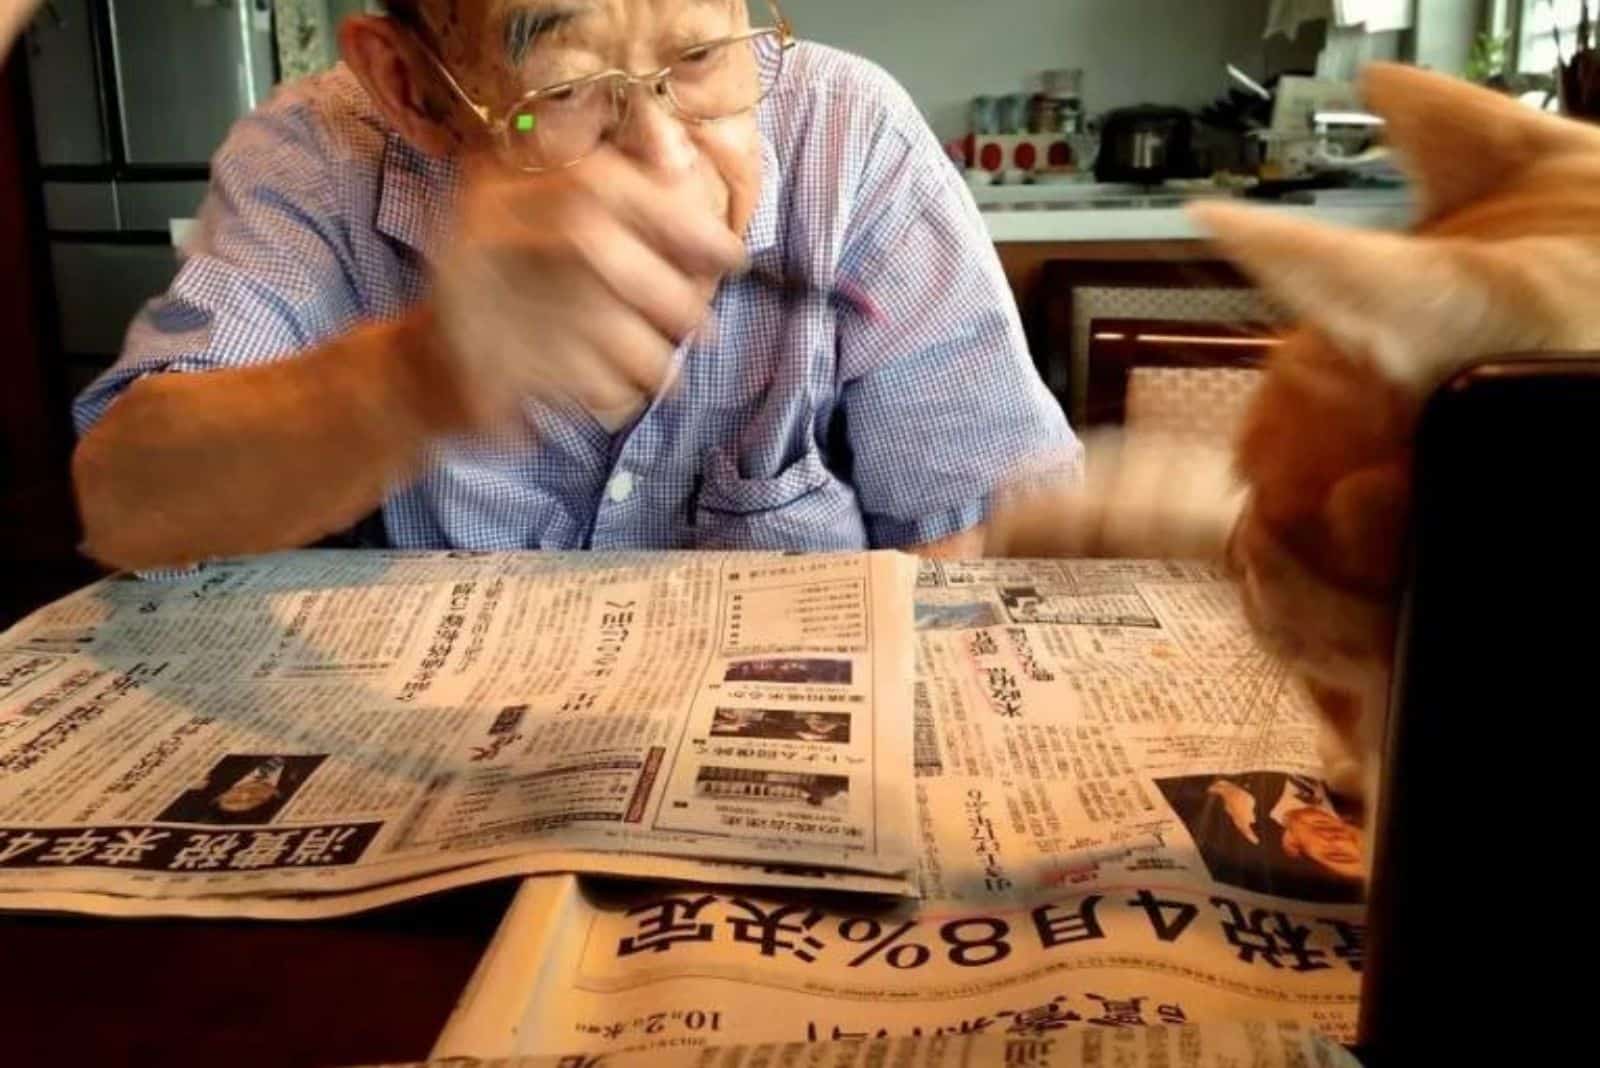 man reading newspaper with cat on the table